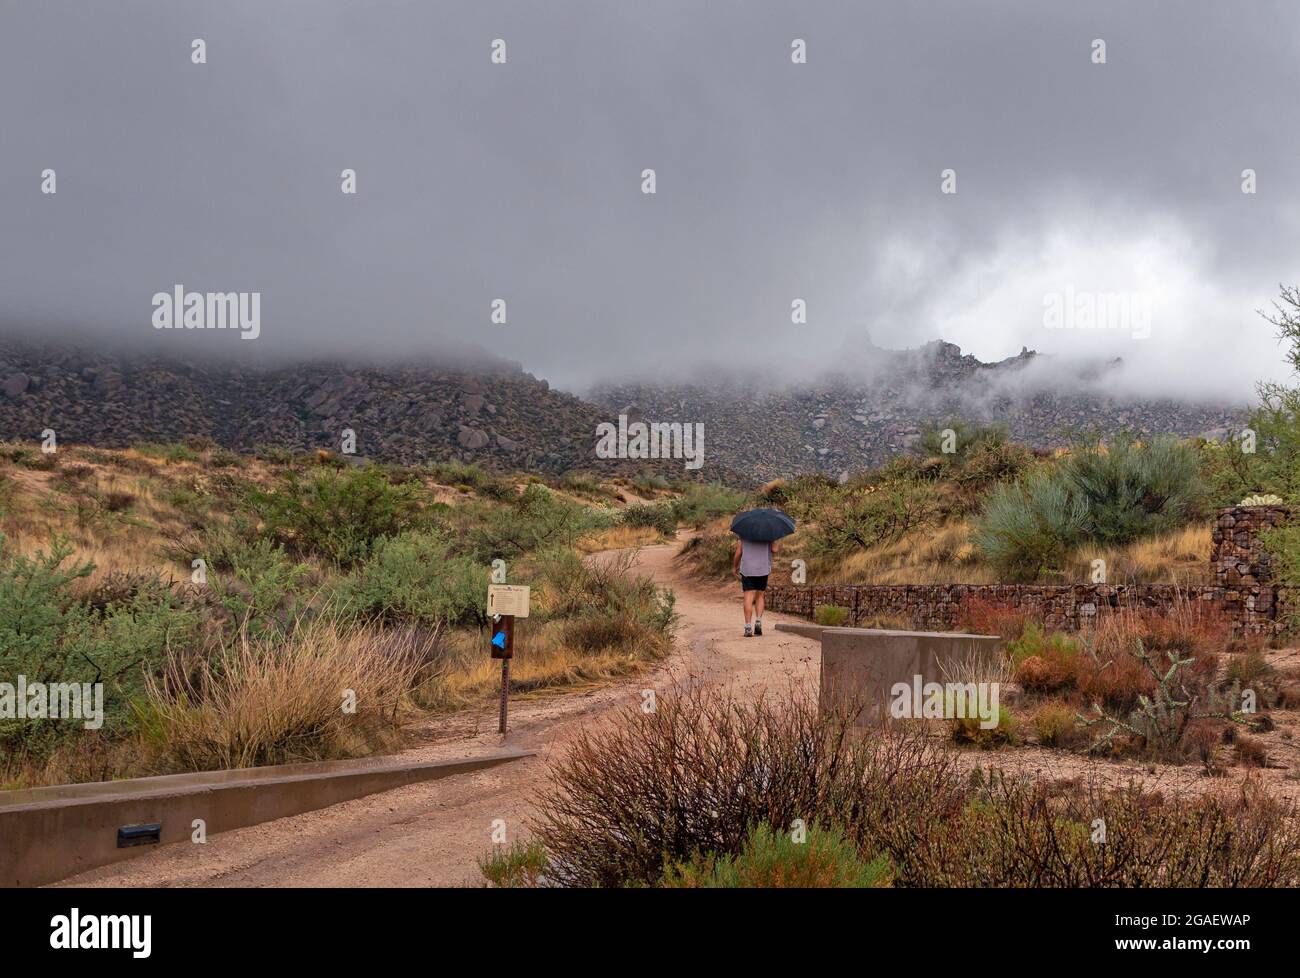 Image of a maile hiker with umbrella heading up toms thumb trail in rain storm in North Scottsdal. AZ Stock Photo